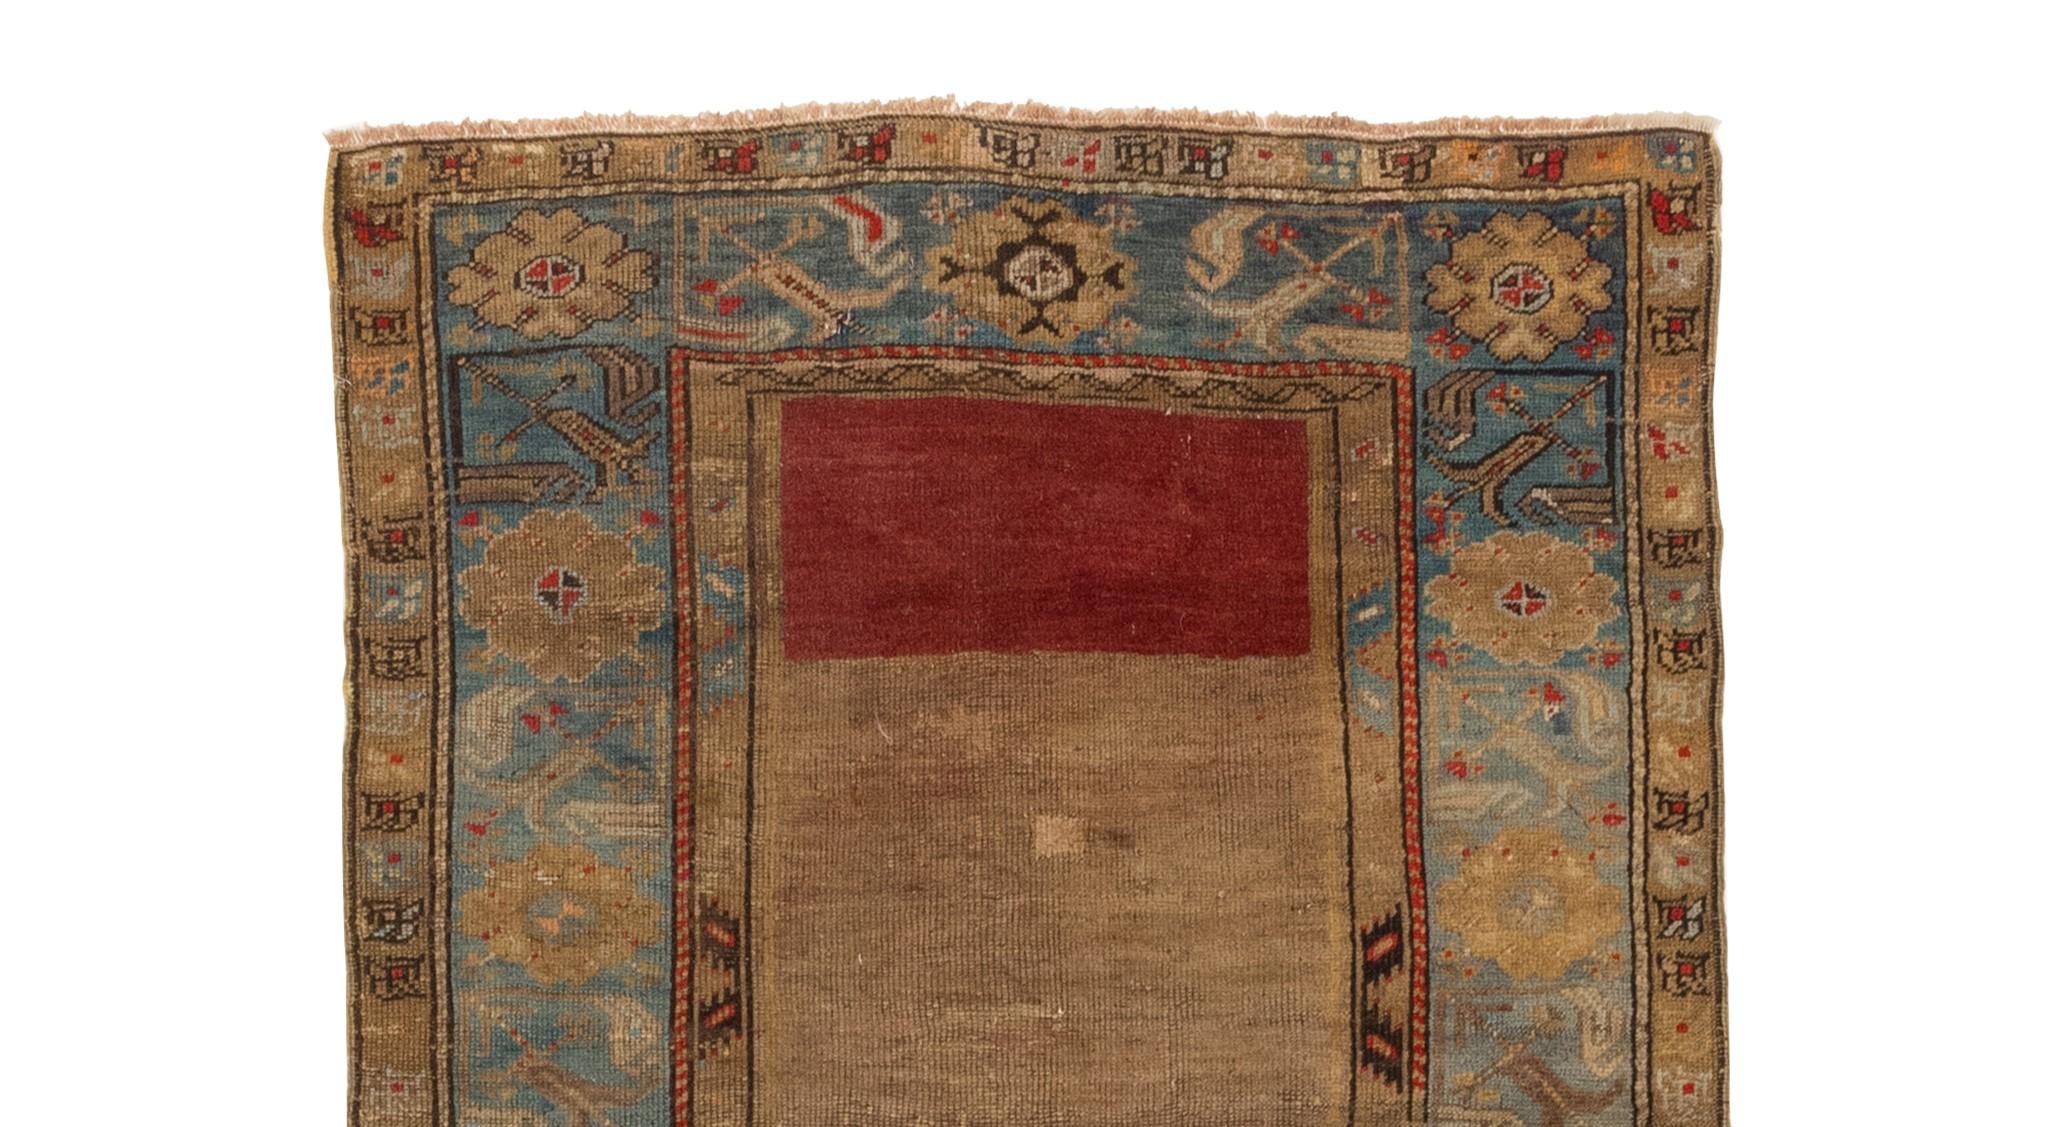 This exquisite Turkish prayer rug, adorned with enchanting floral motifs, is a true masterpiece of traditional craftsmanship and artistic expression. Handwoven with meticulous attention to detail, it showcases the skilled artistry and cultural